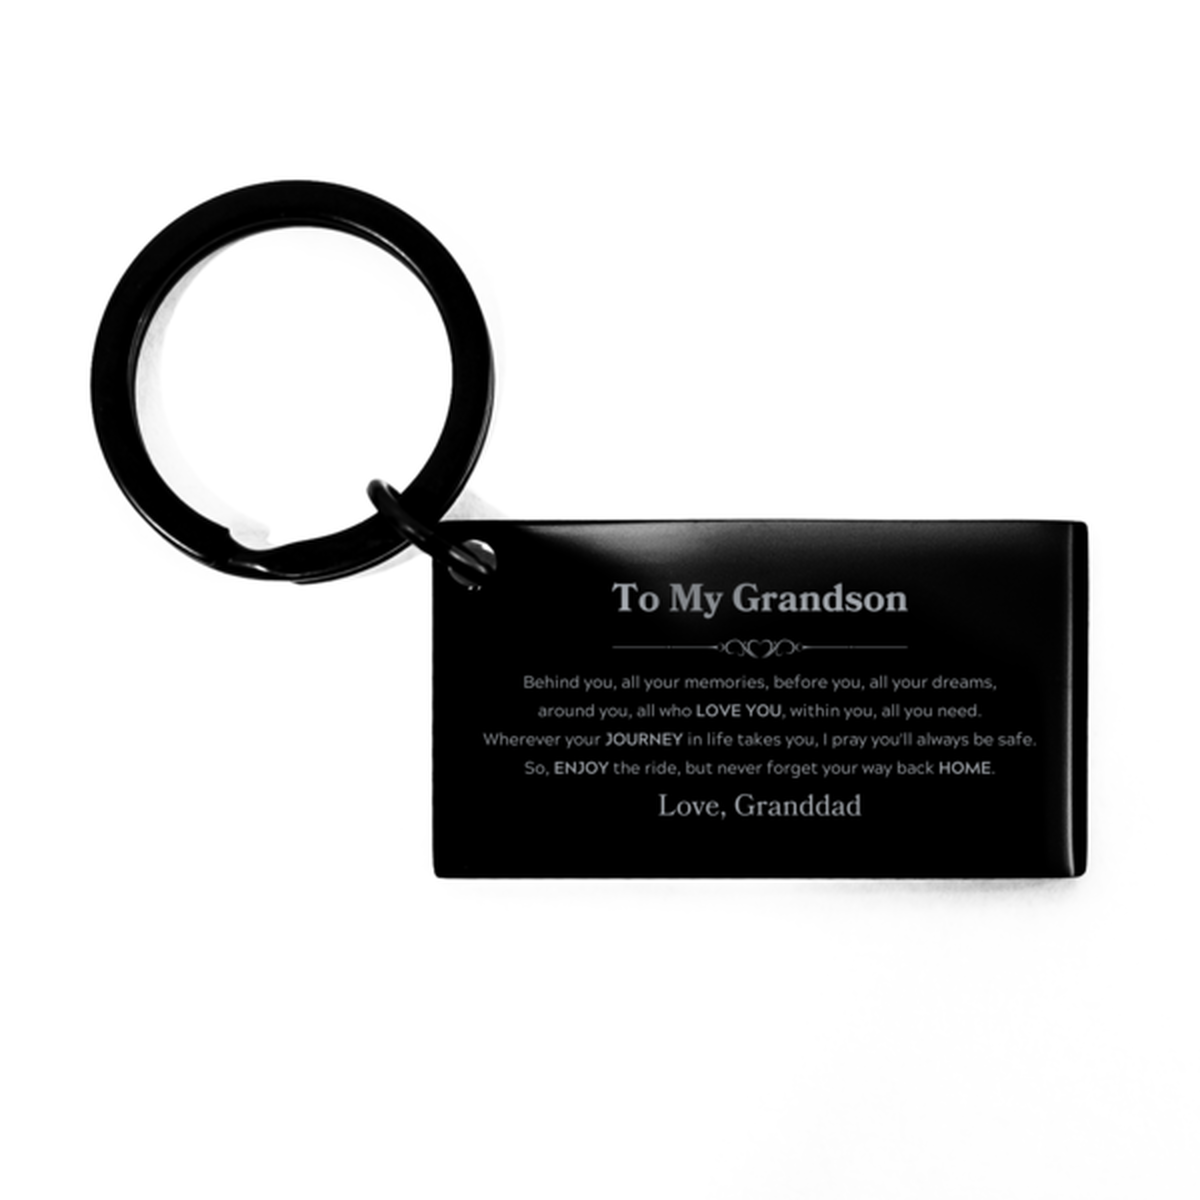 To My Grandson Graduation Gifts from Granddad, Grandson Keychain Christmas Birthday Gifts for Grandson Behind you, all your memories, before you, all your dreams. Love, Granddad